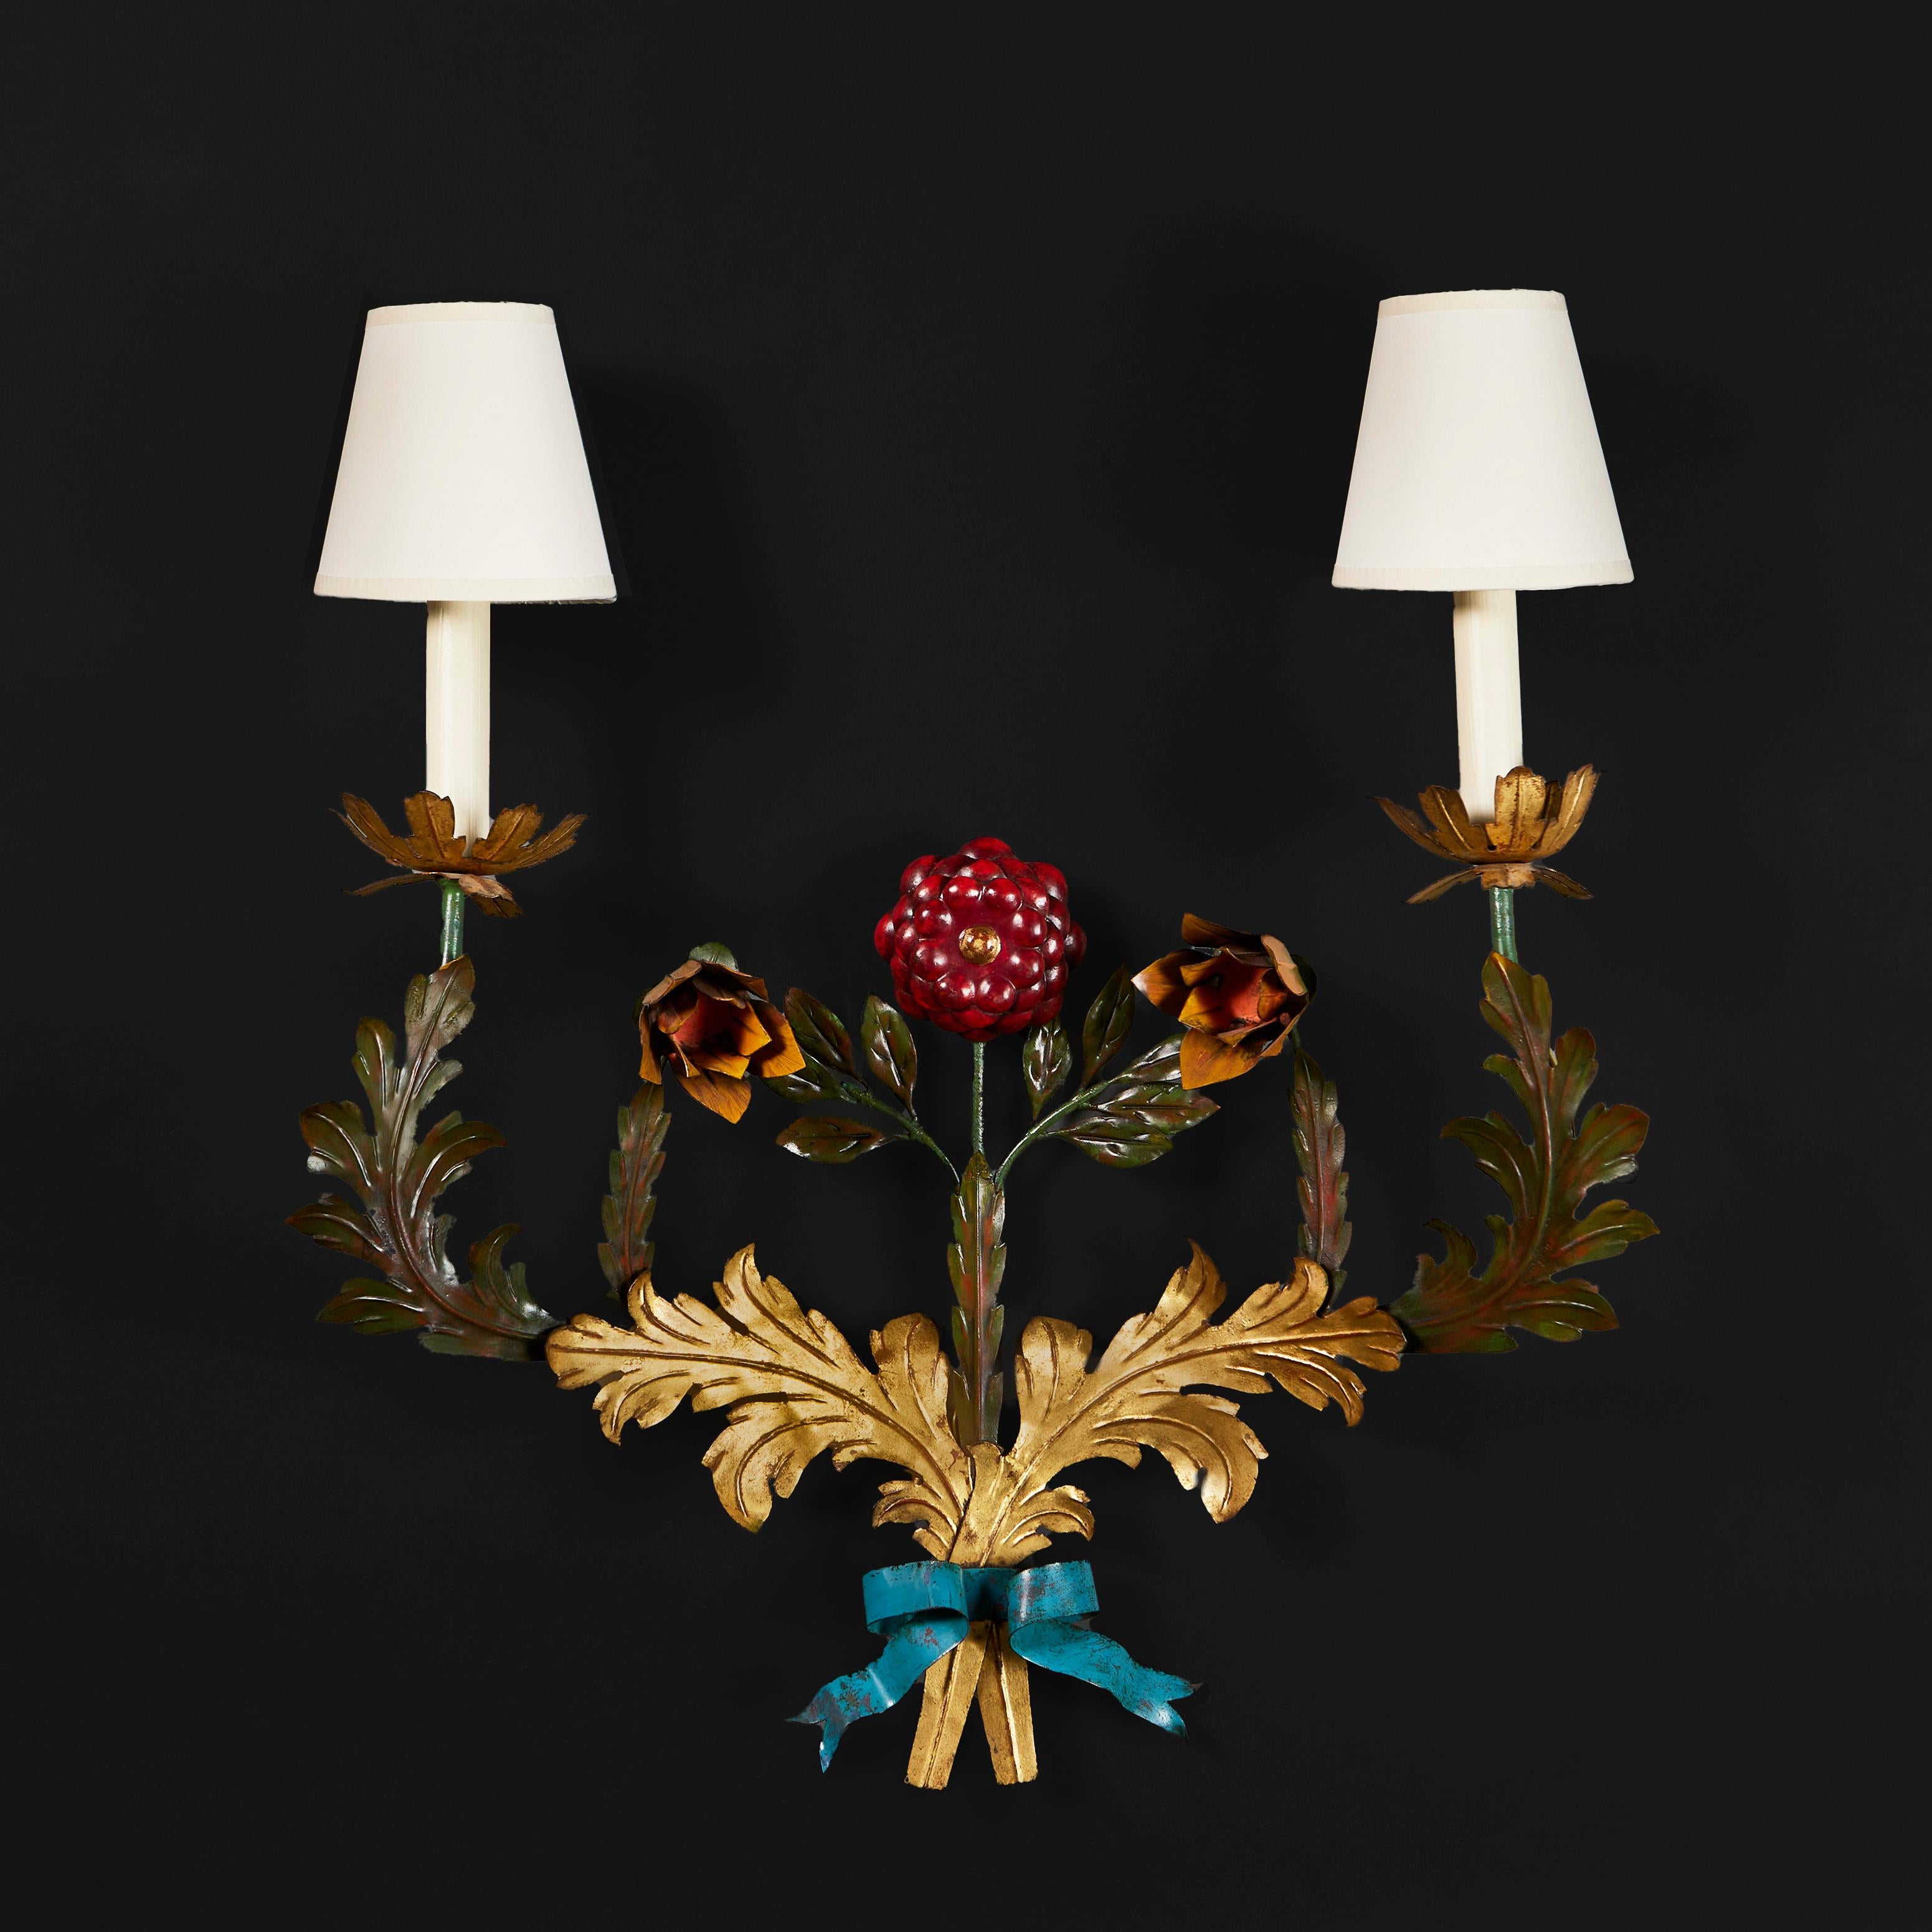 France, circa 1900

A French painted tole wall light, the metal cut and embossed to depict a flower bouquet with central red rose, tulips and gilded leaves all tied with a blue ribbon.

Height 60.00cm

Width 59.00cm

Depth 20.00cm